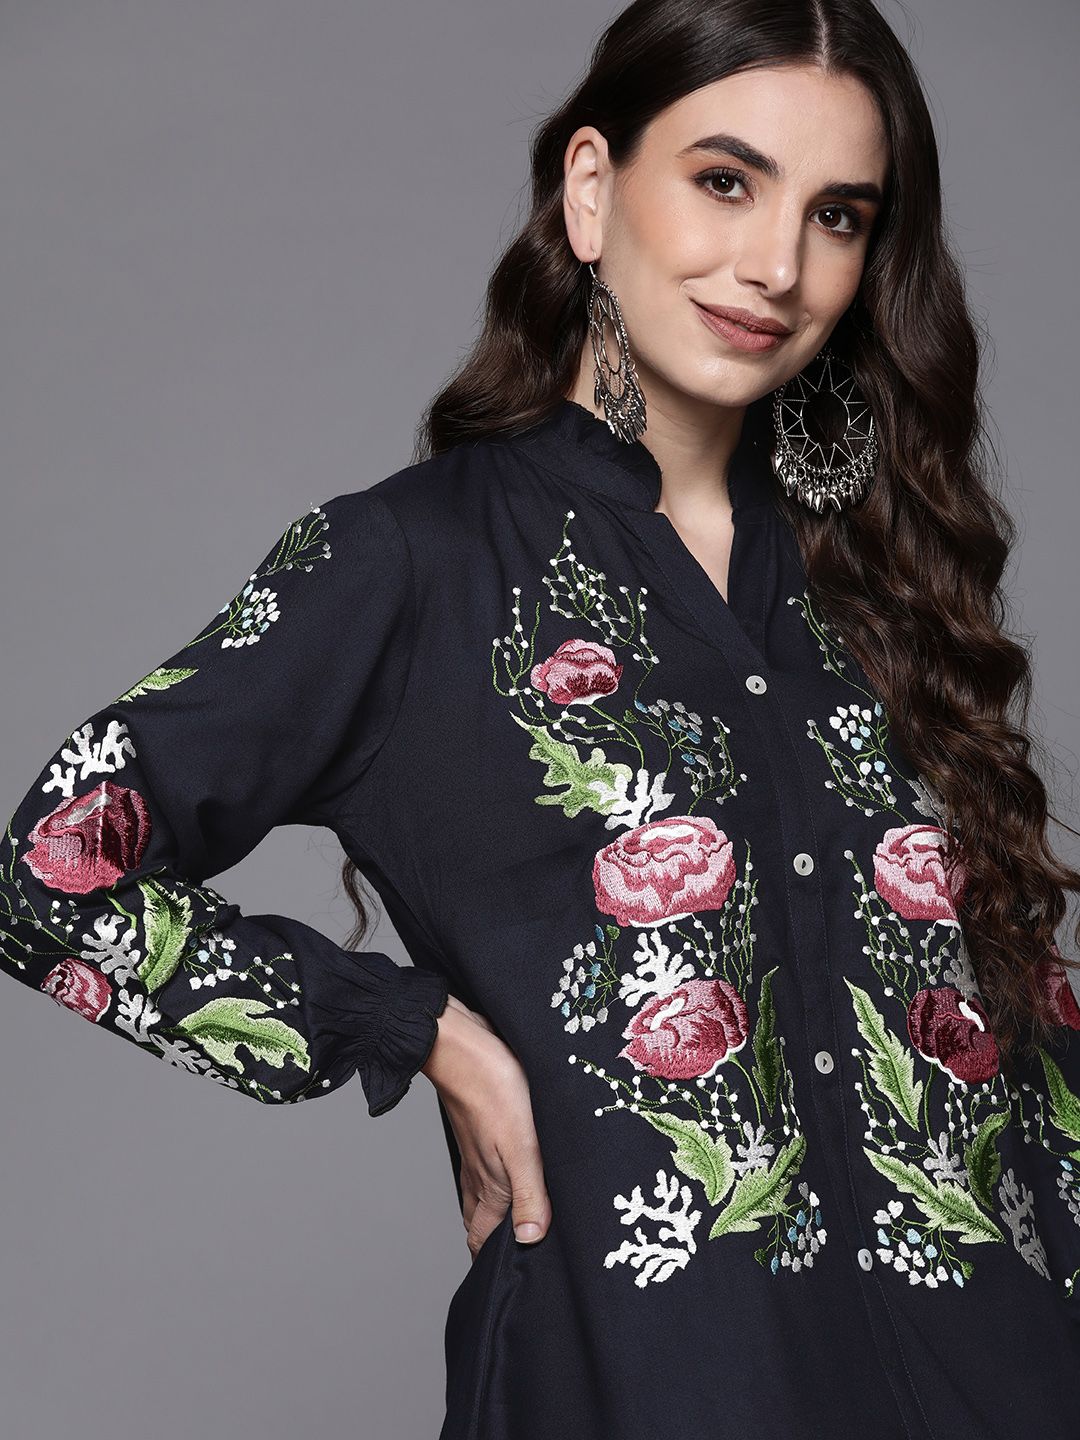 Indo Era Navy Blue & Green Floral Embroidered Ethnic A-Line Dress Price in India